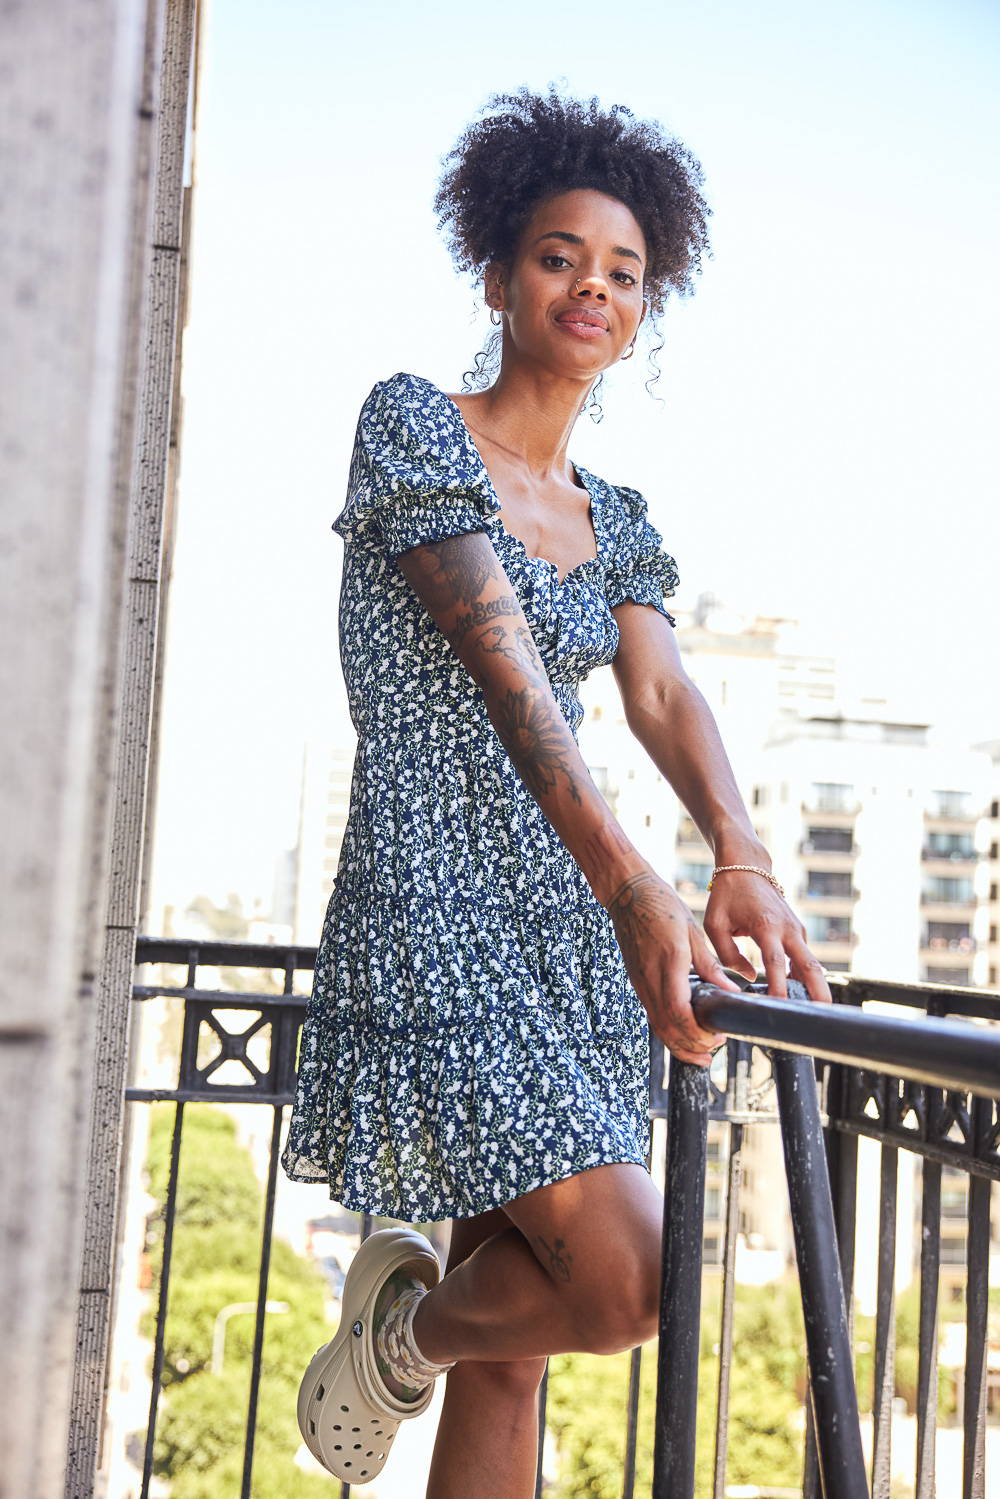 Trixxi Back to school embracing dorm life hanging out on the balcony in a navy with white flowers tier dress.